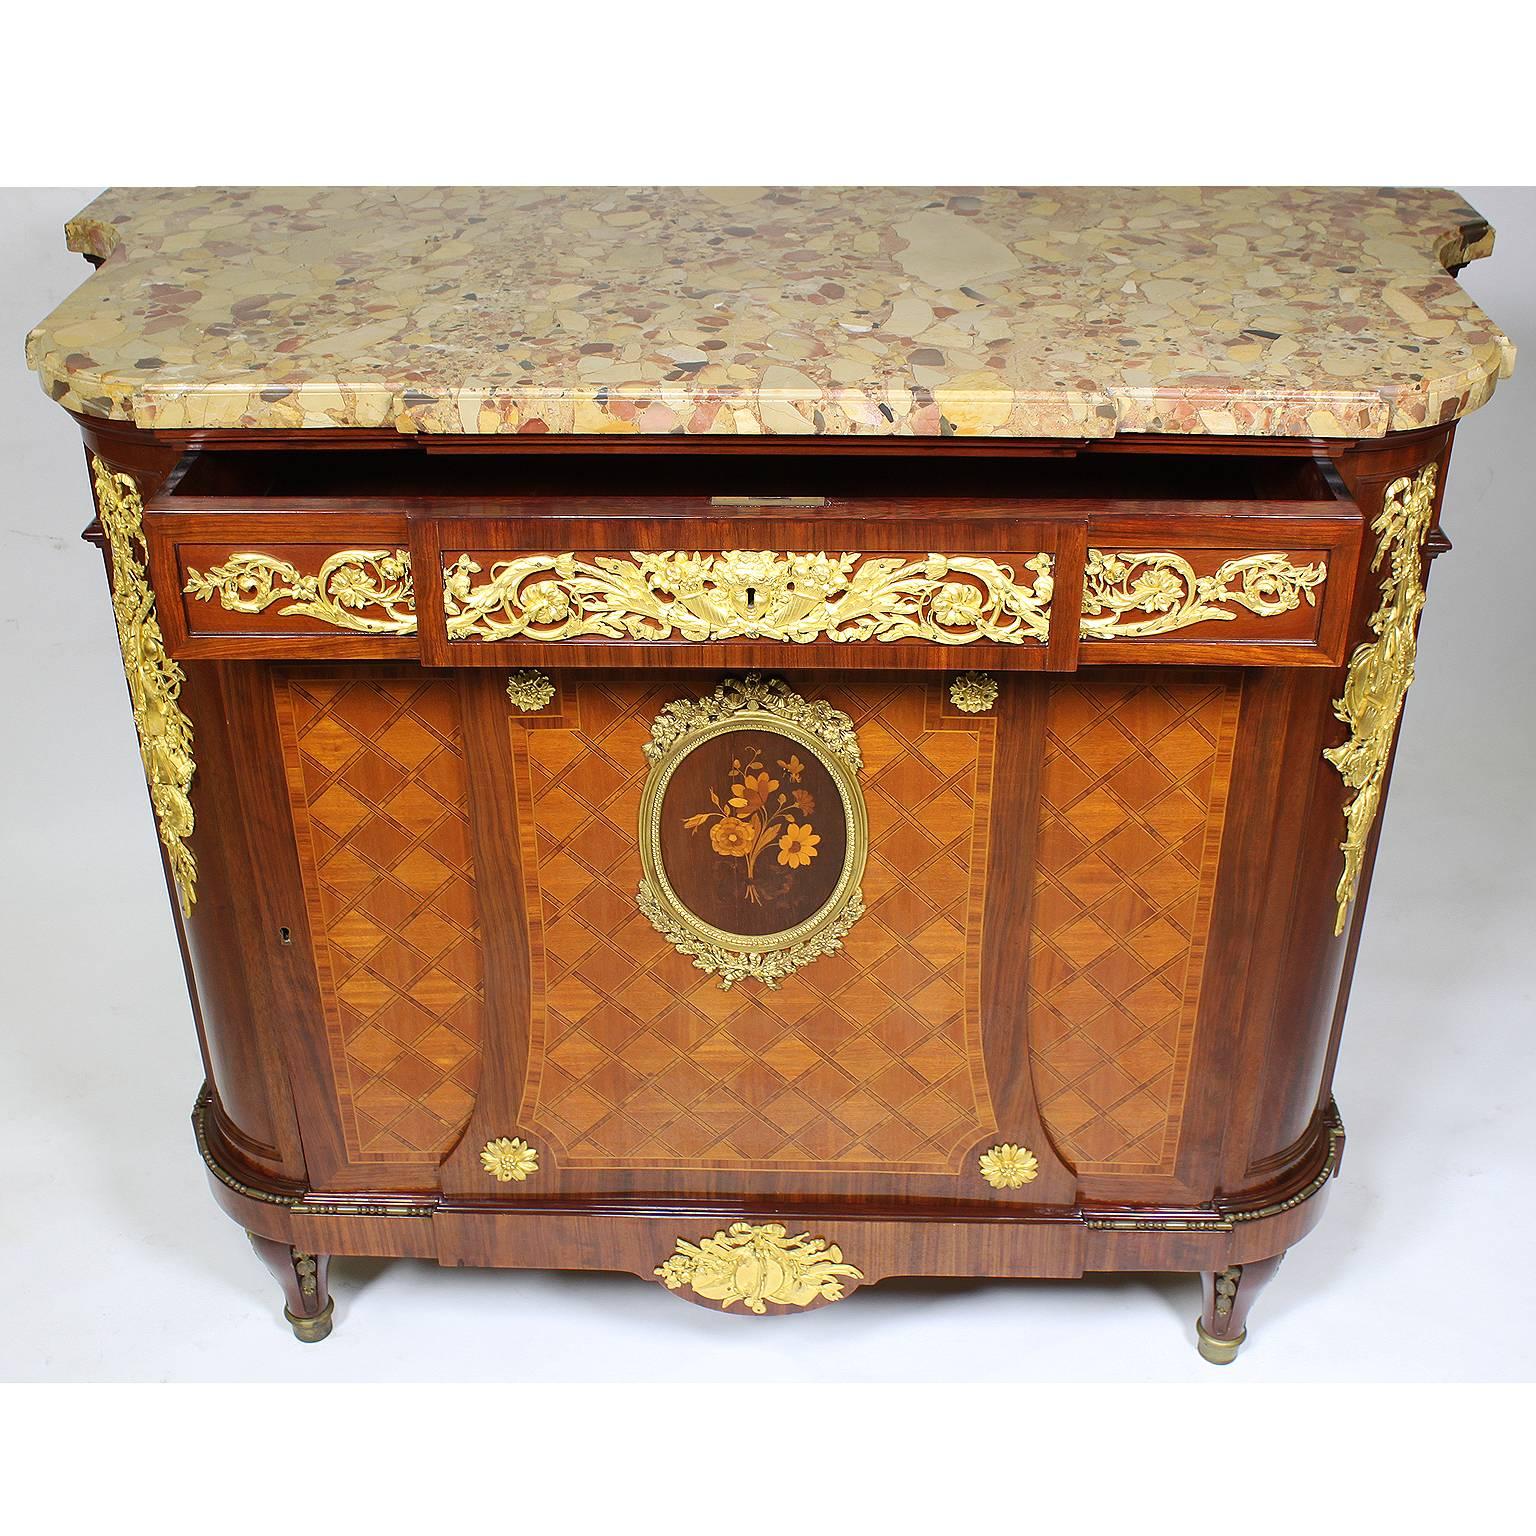 Belle Époque French 19th Century Louis XVI Style Ormolu-Mounted Marquetry Demilune Commode